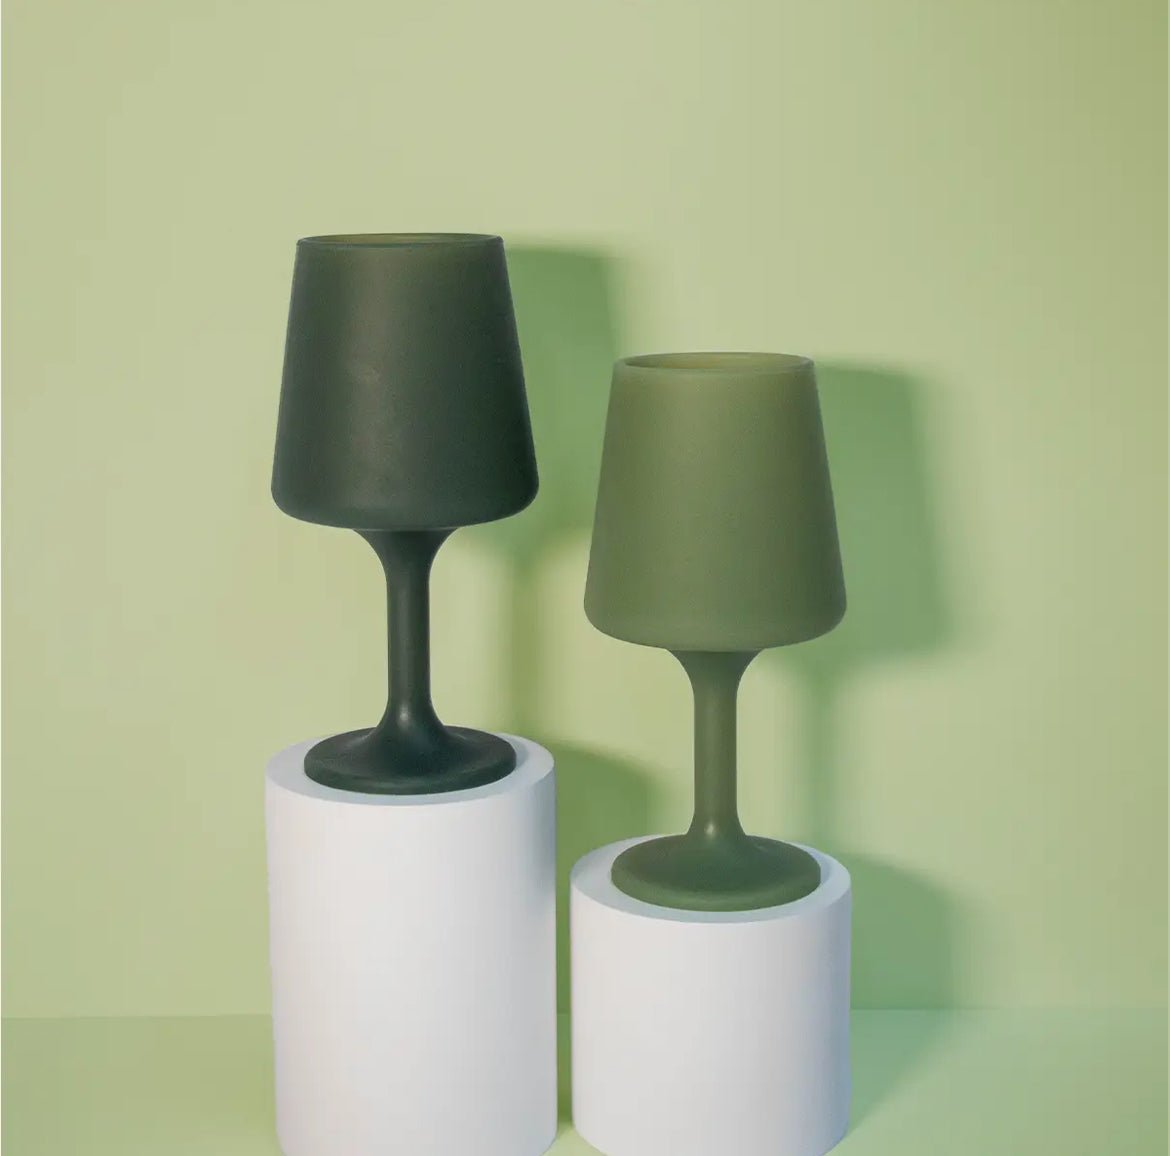 ‘Swepp’ Silicone Unbreakable Wine Glasses (Sage + Olive) is - EcoLuxe Furnishings